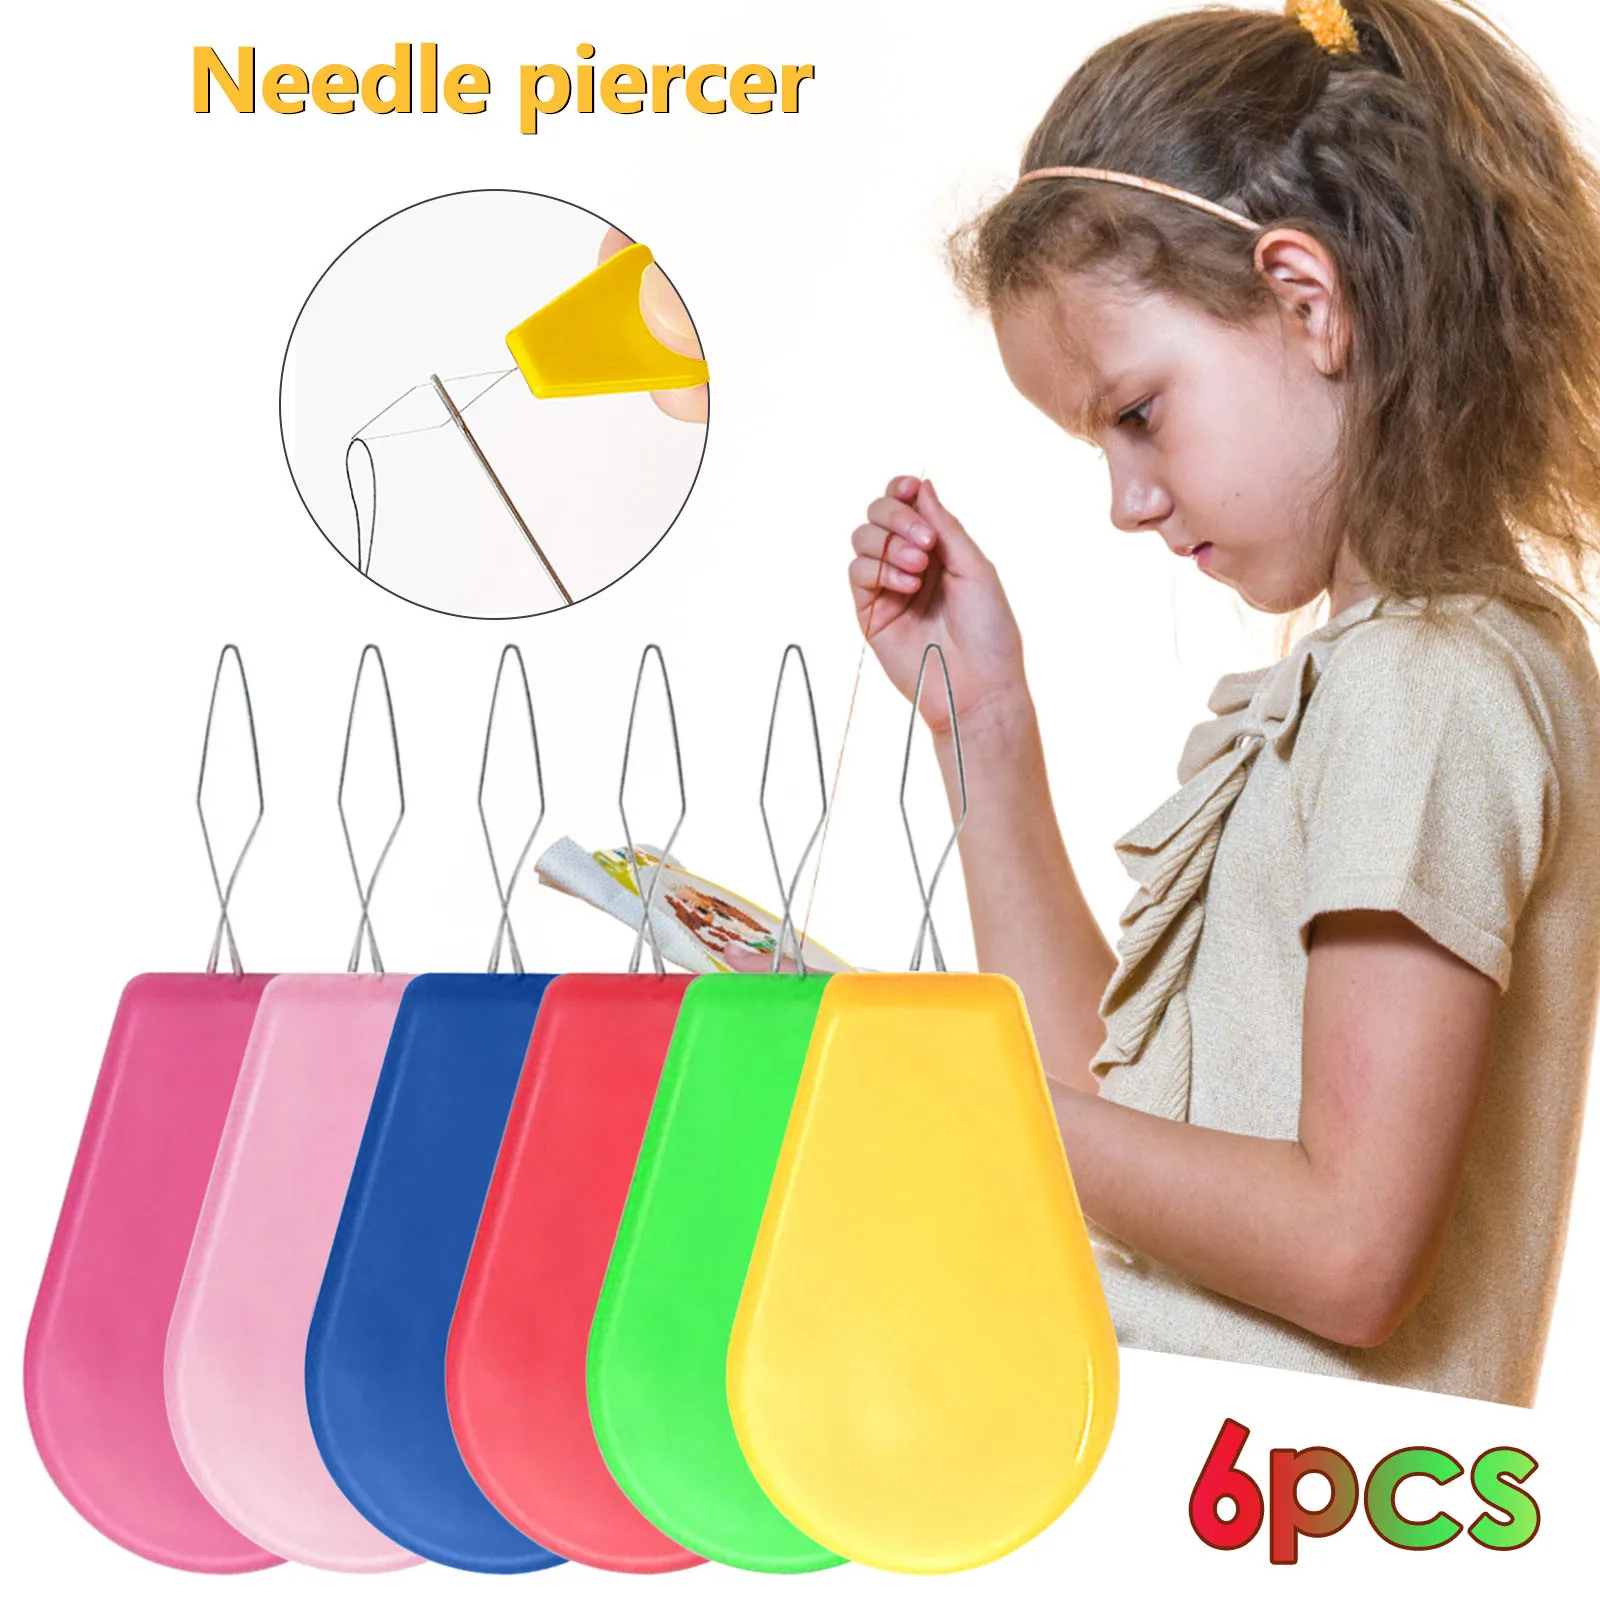 Plastic Wire Loop DIY Needle Threader Hand Machine Sewing Tool for DIY Sewing Crafting Pink, Blue, Yellow 6 Pieces 3-in-1 Plastic Needle Threaders 